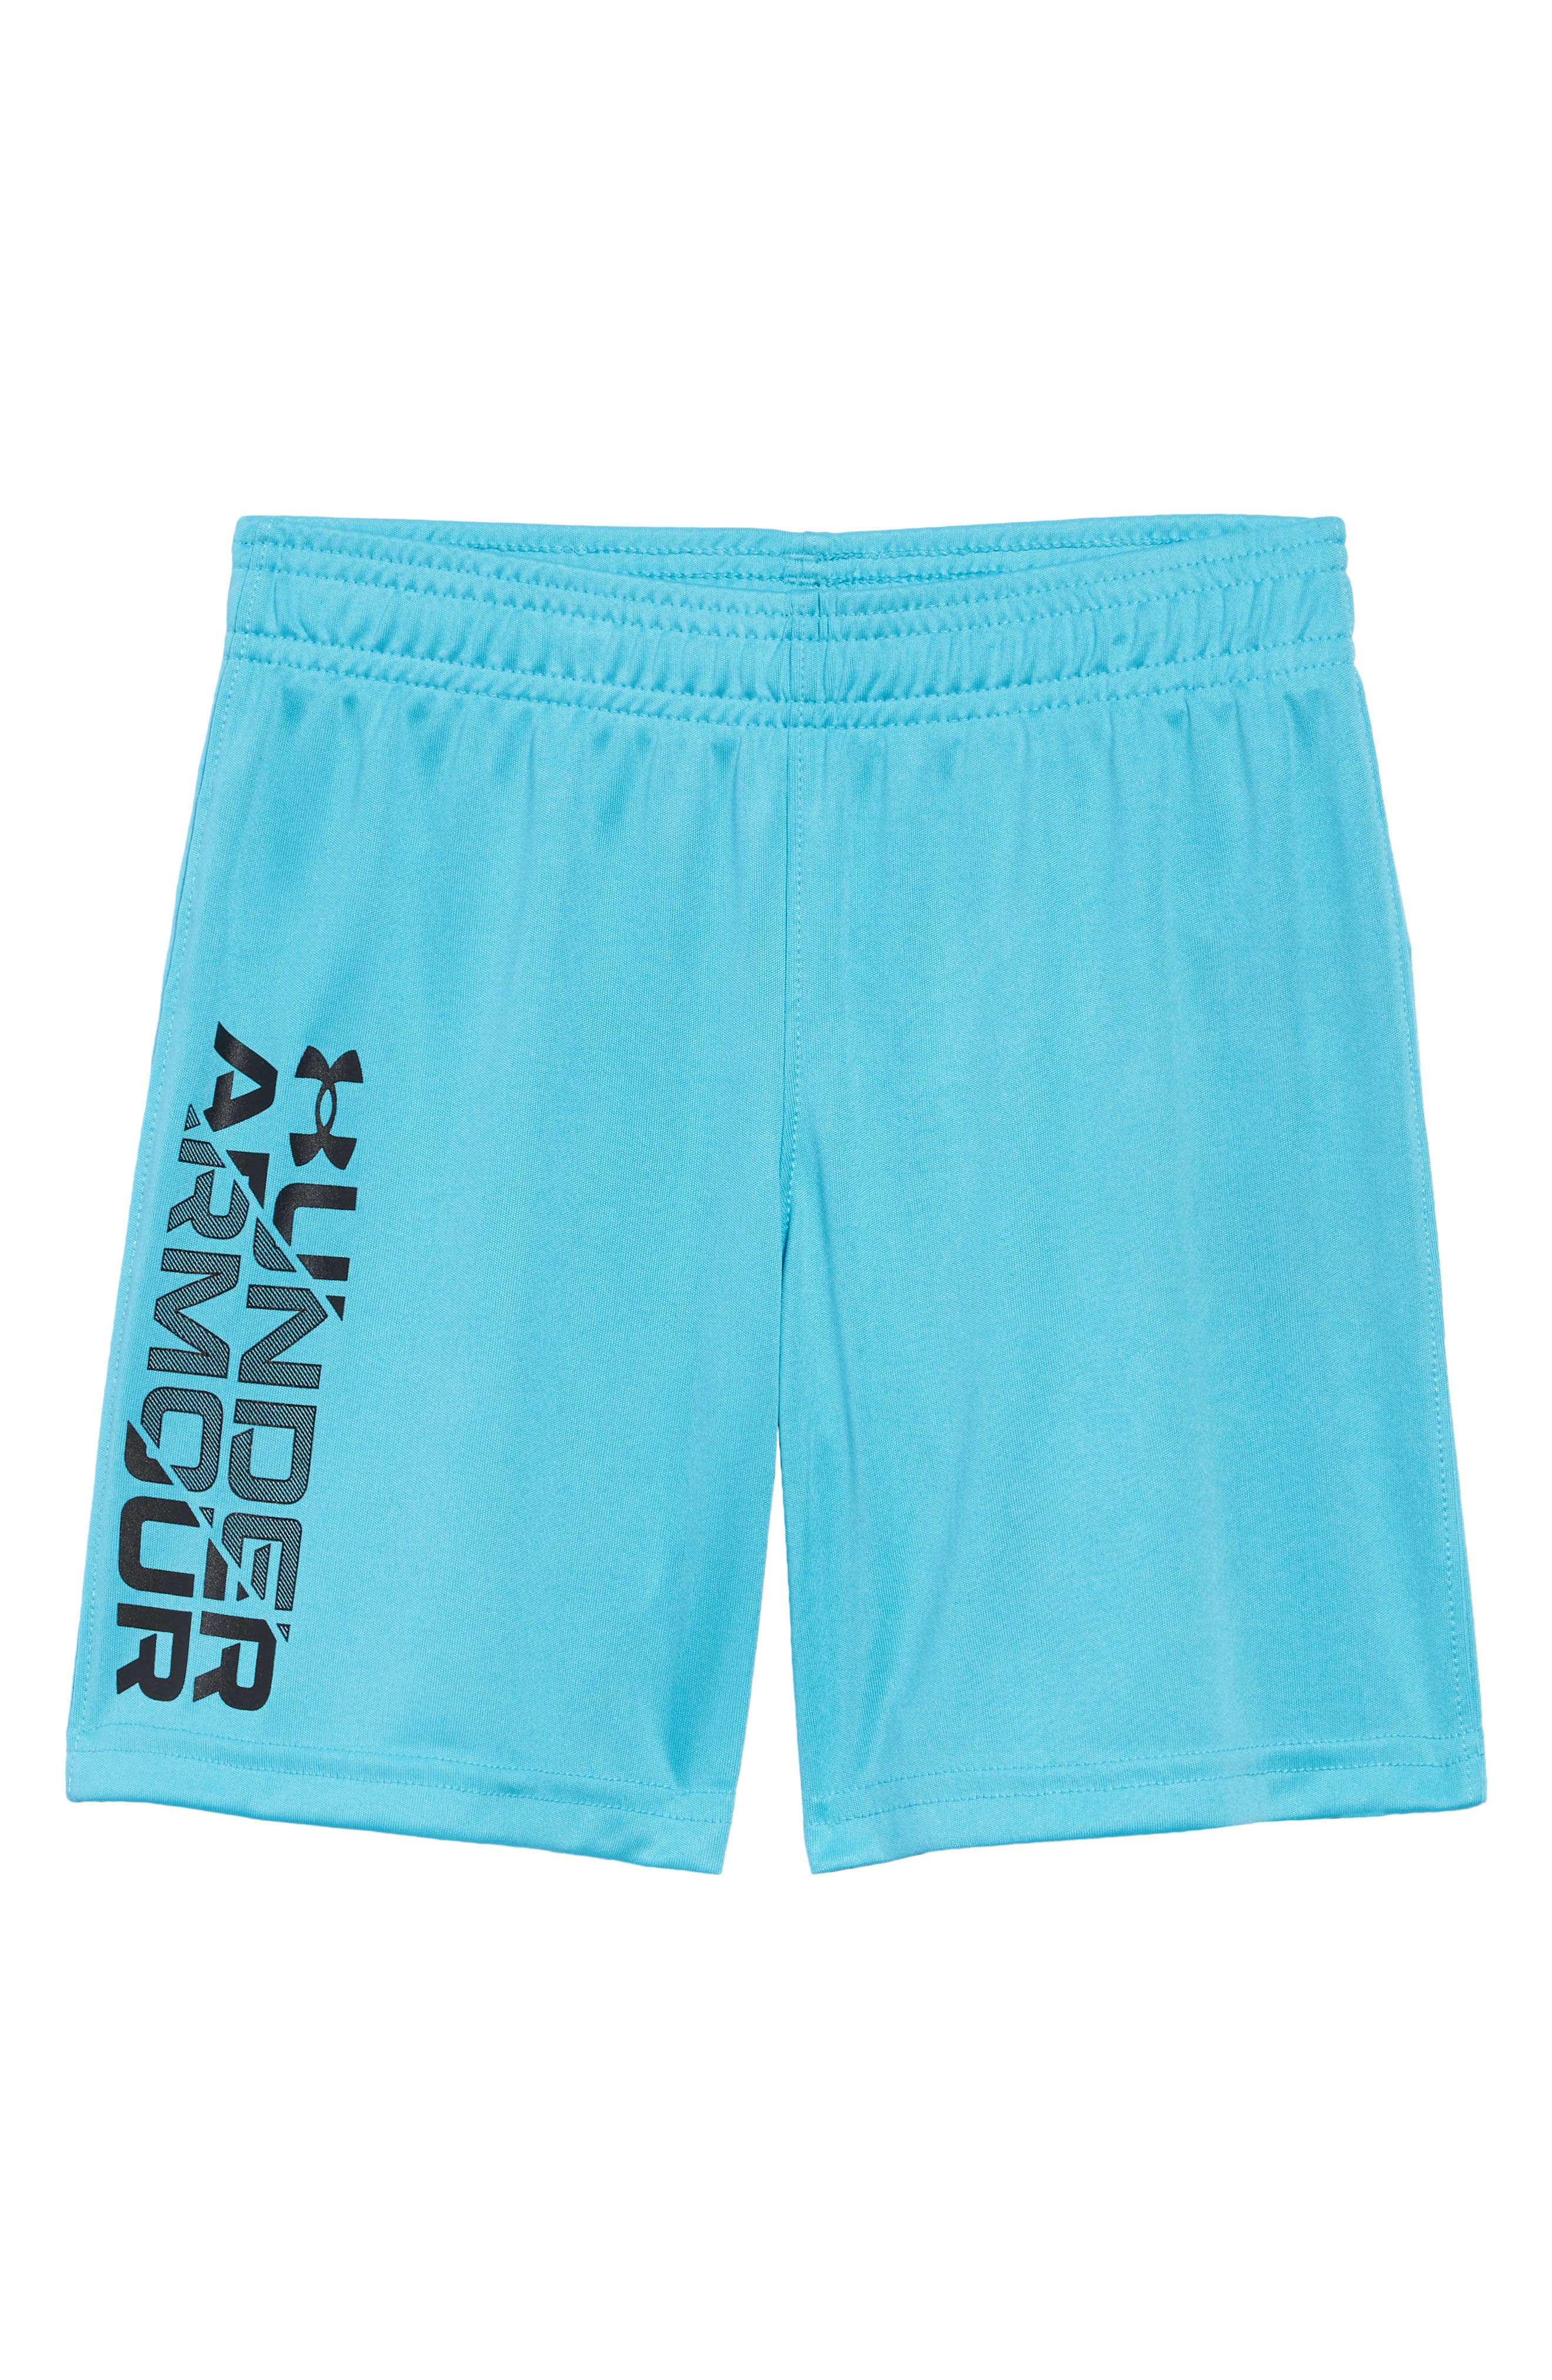 XL GREEN/ WHITE 27-29 waist MSRP $49 UNDER ARMOUR Athletic Shorts YOUTH L 